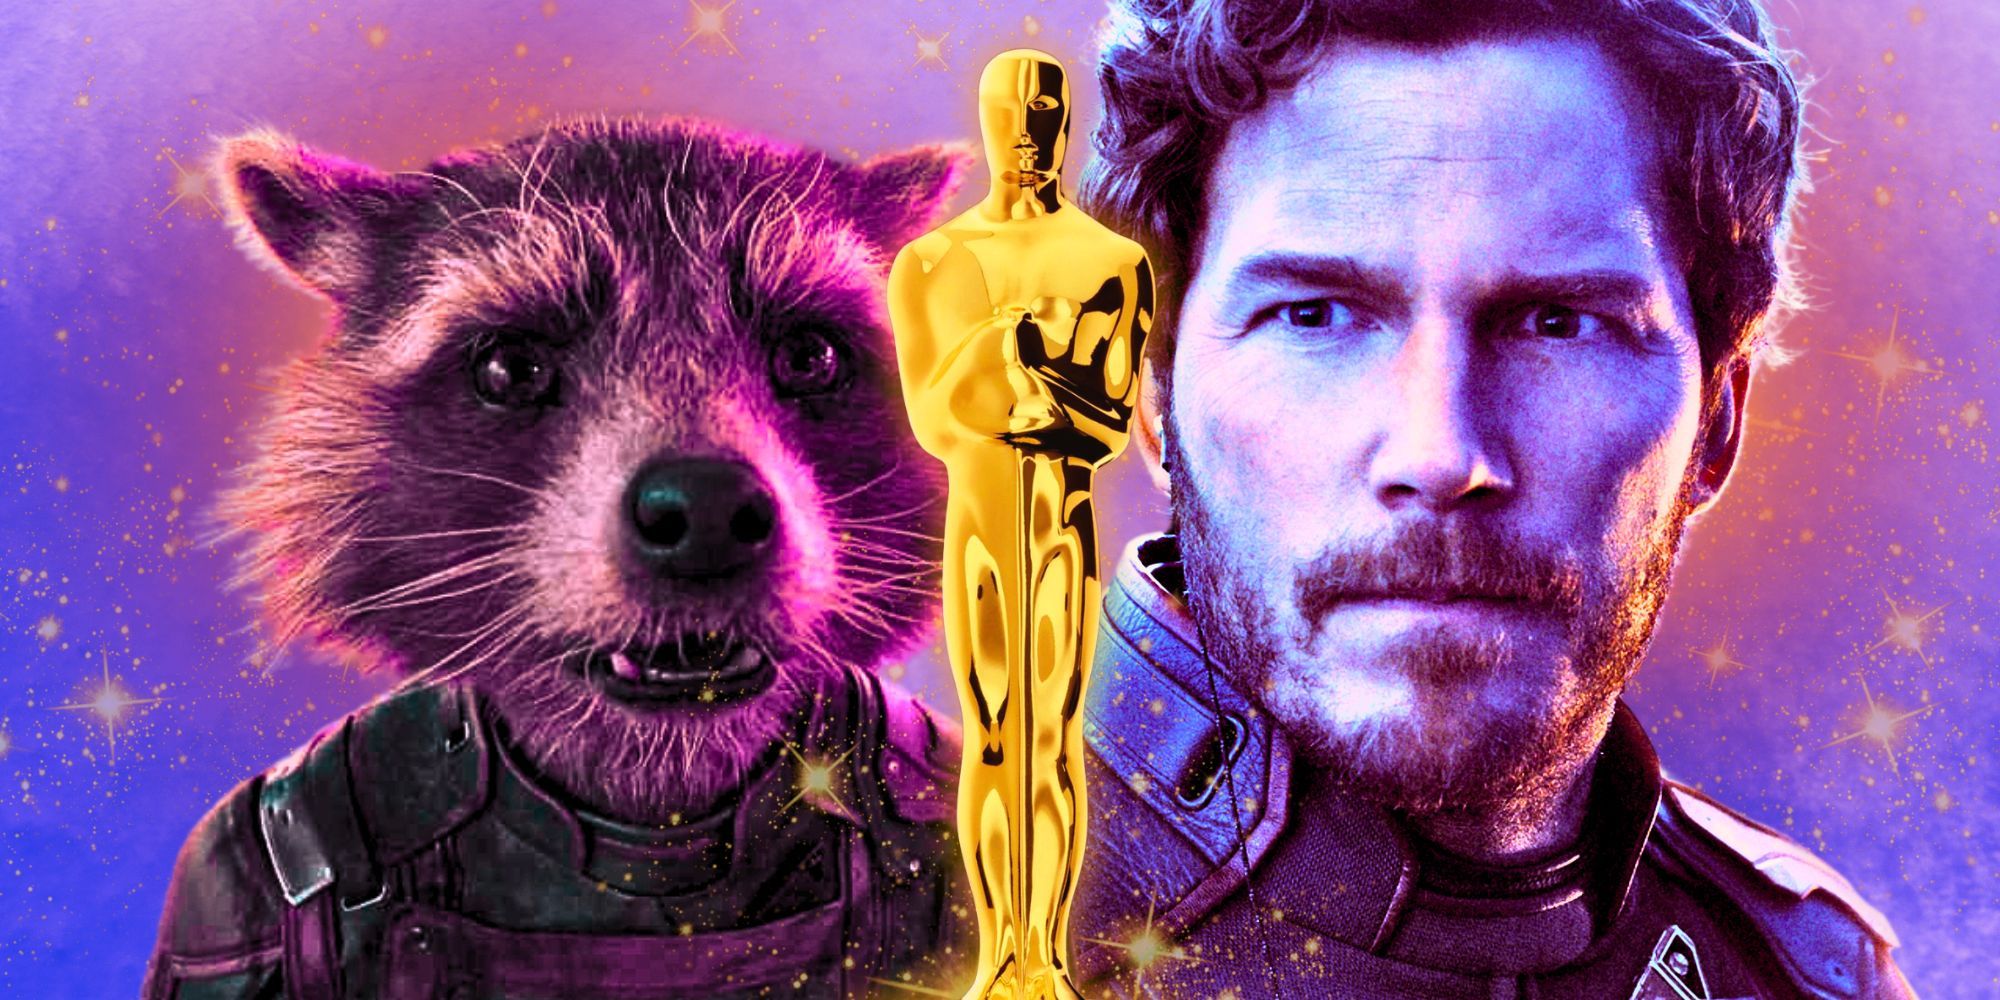 Rocket Racoon and Star Lord in Guardians of the Galaxy 3 separated by an Oscar statue